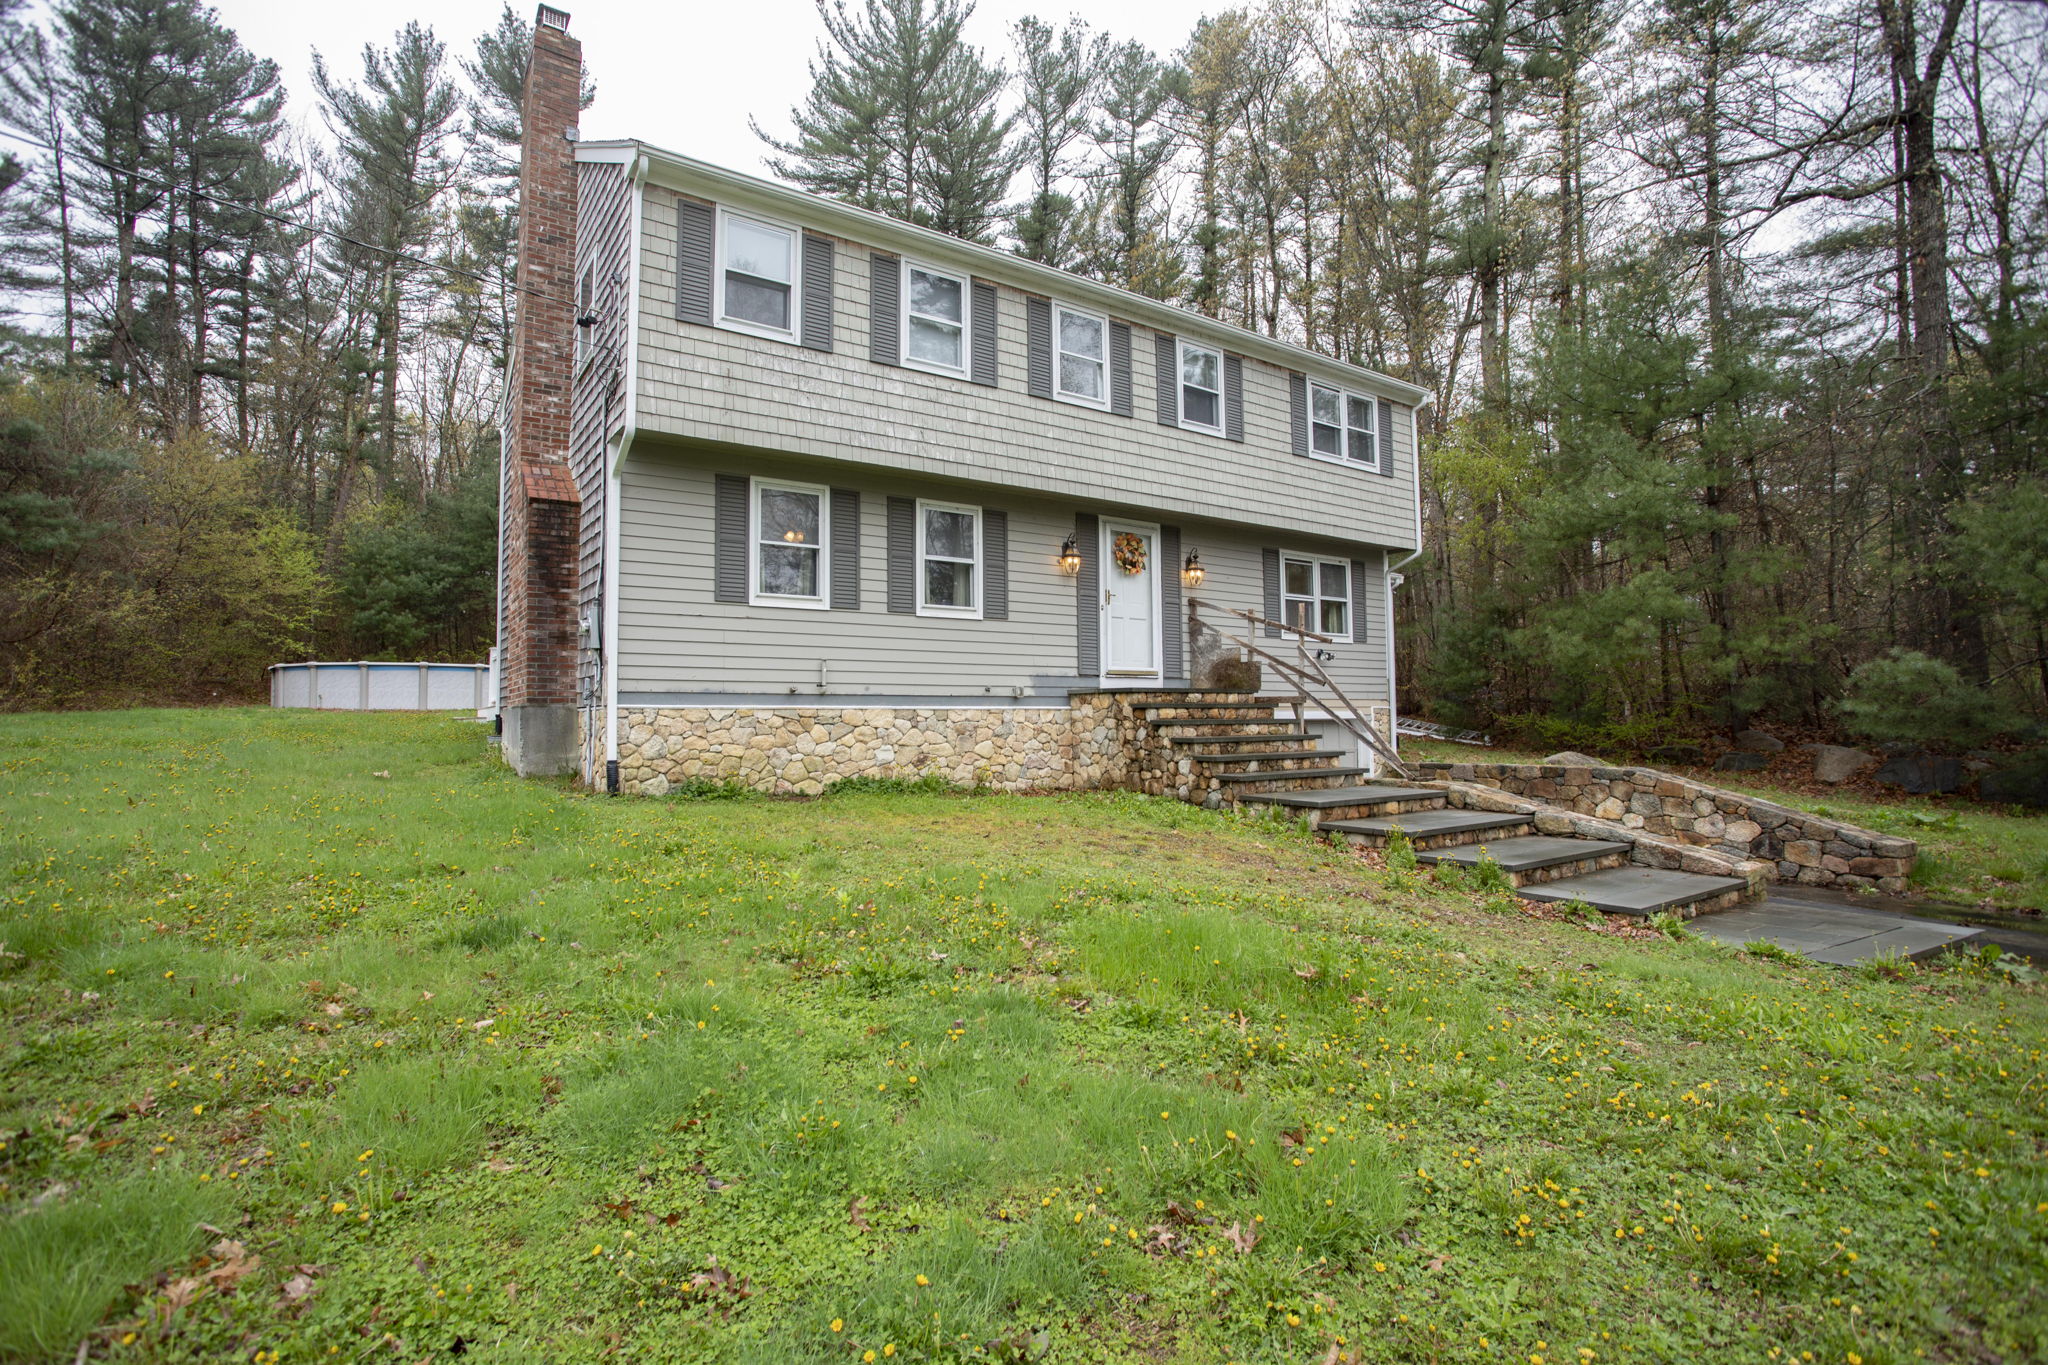  31 Old Powder House Rd, Lakeville, MA 02347, US Photo 4